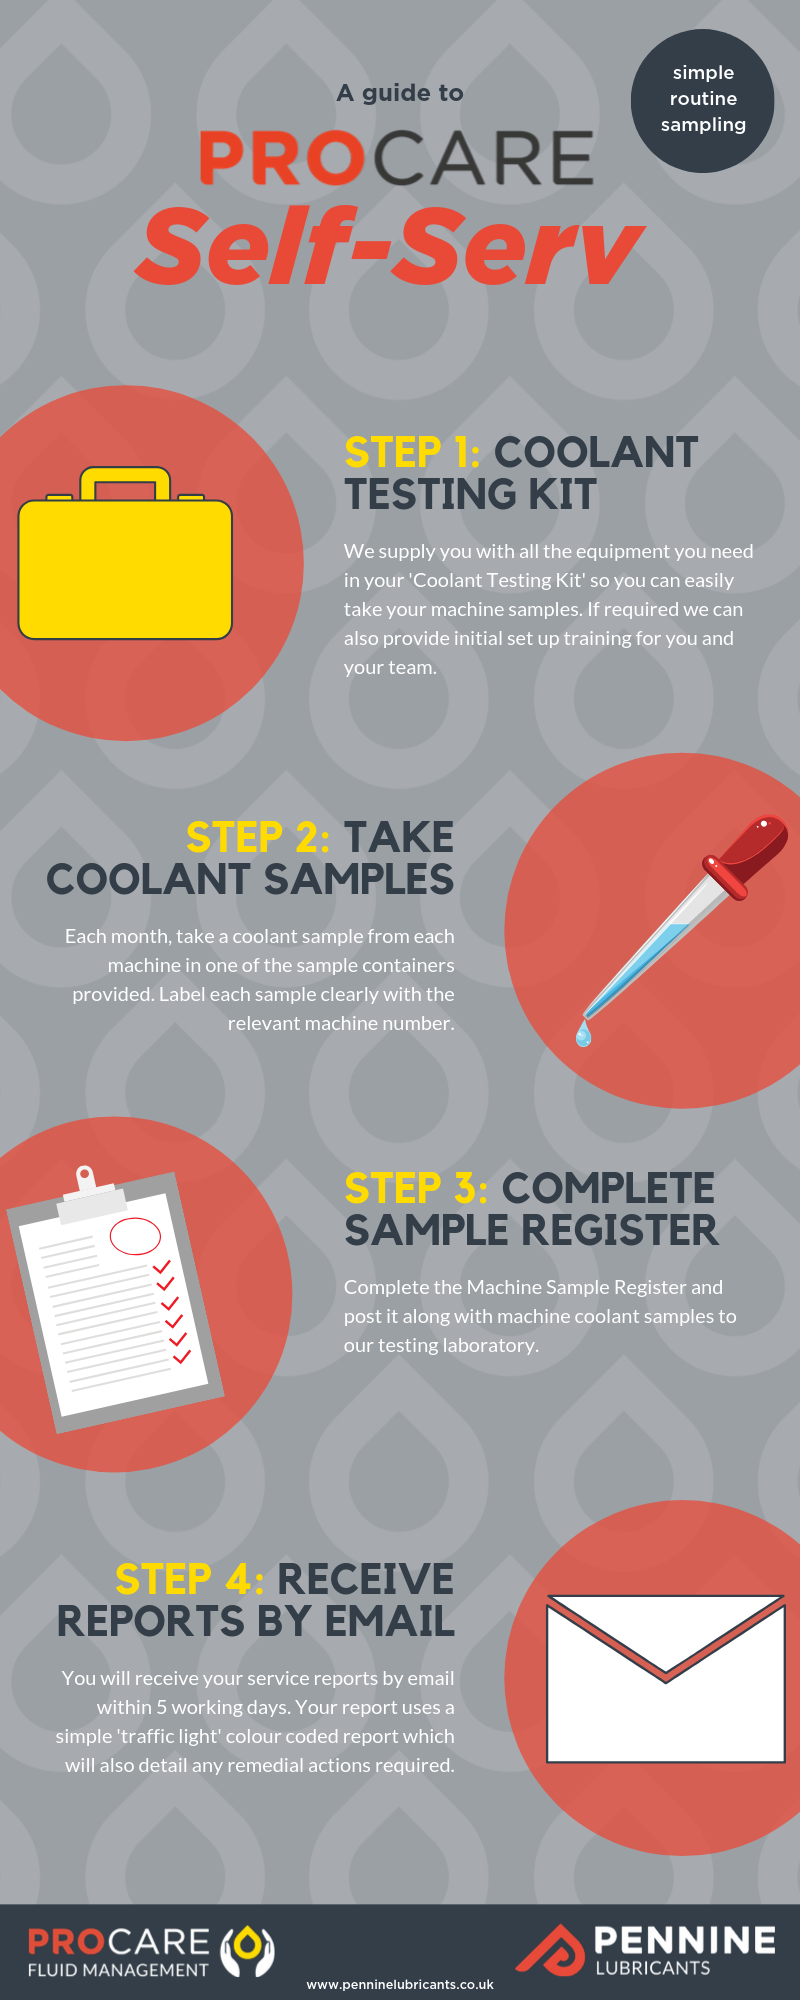 Infographic: A guide to Simple Routine Sampling